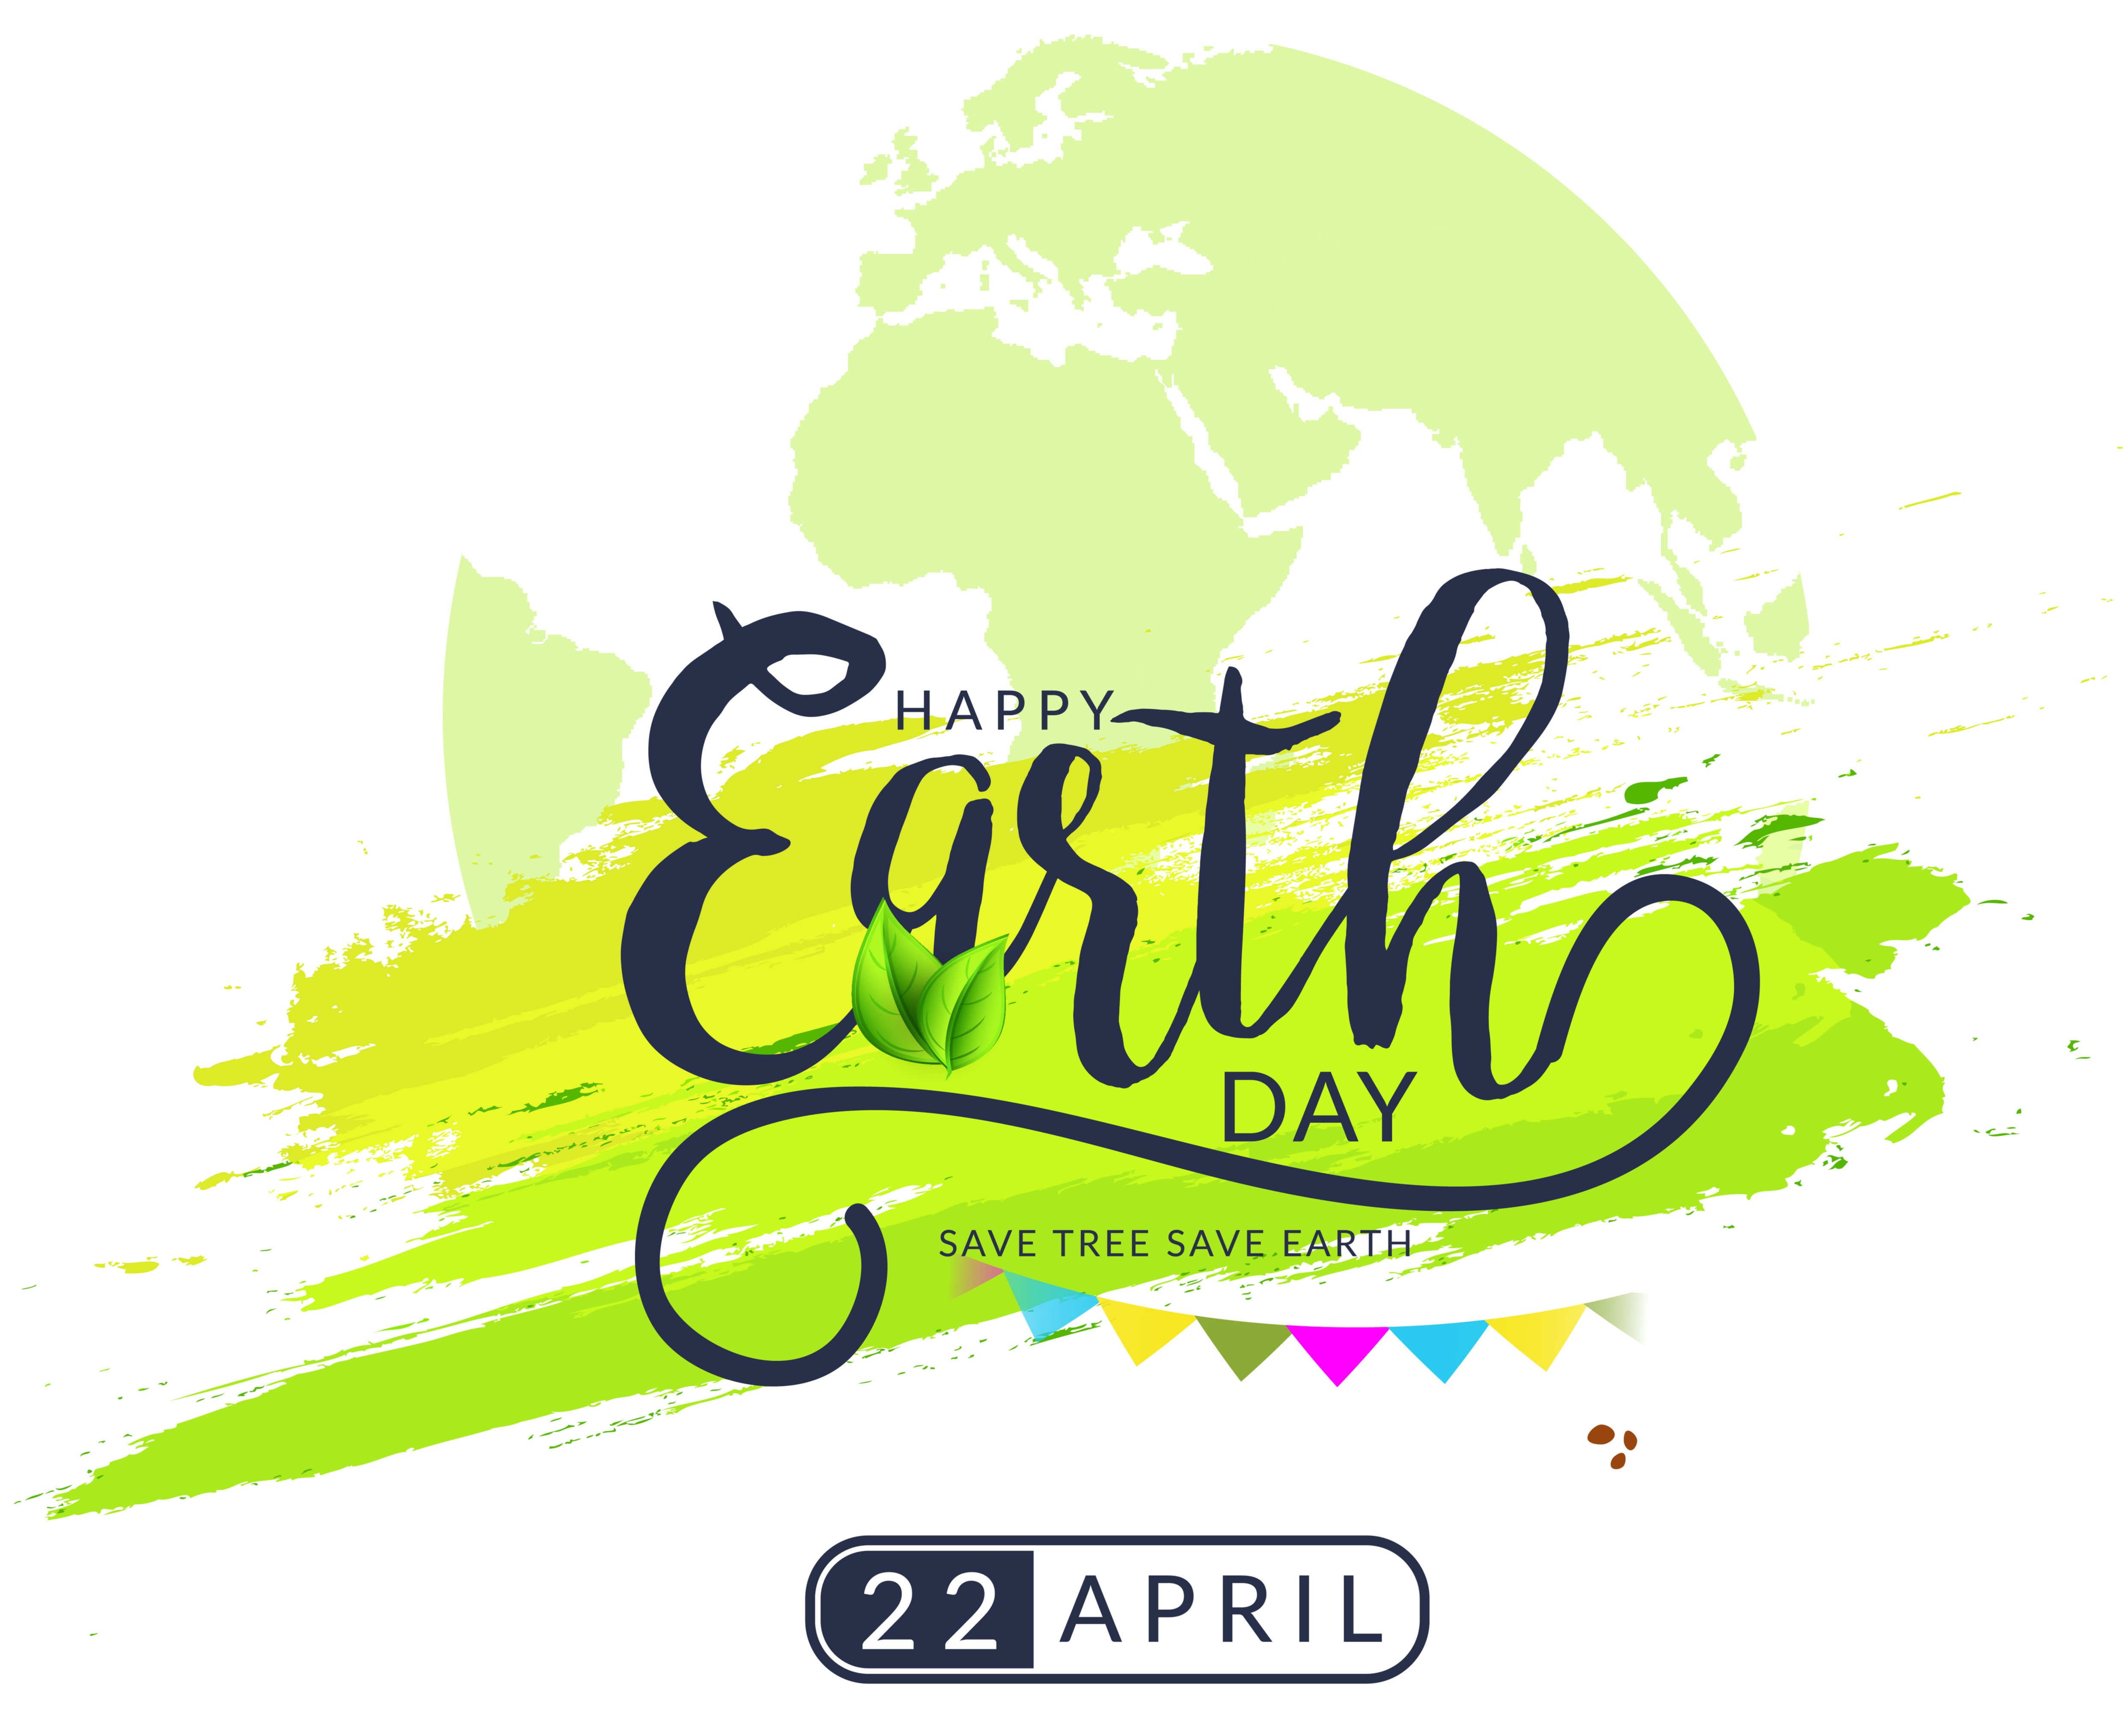 World Earth Day 2019 The World’s Biggest Secular Observance